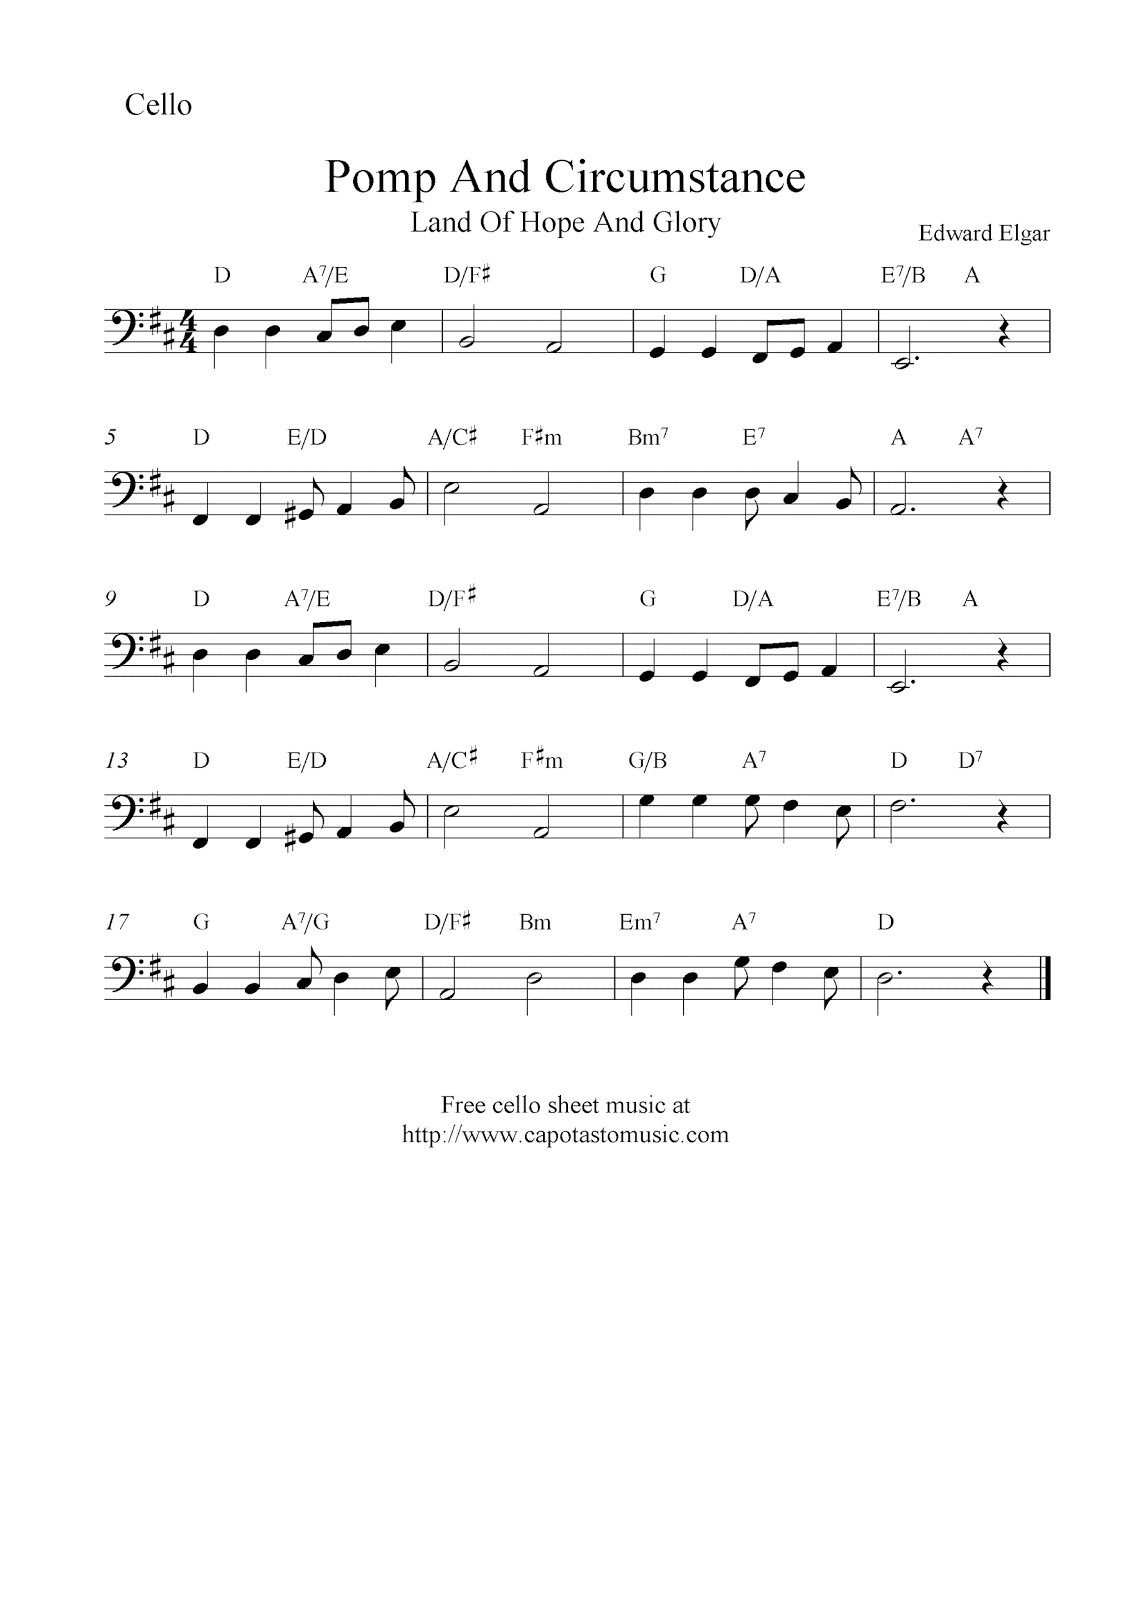 Pomp And Circumstance (Land Of Hope And Glory), Free Cello Sheet - Free Printable Sheet Music Pomp And Circumstance